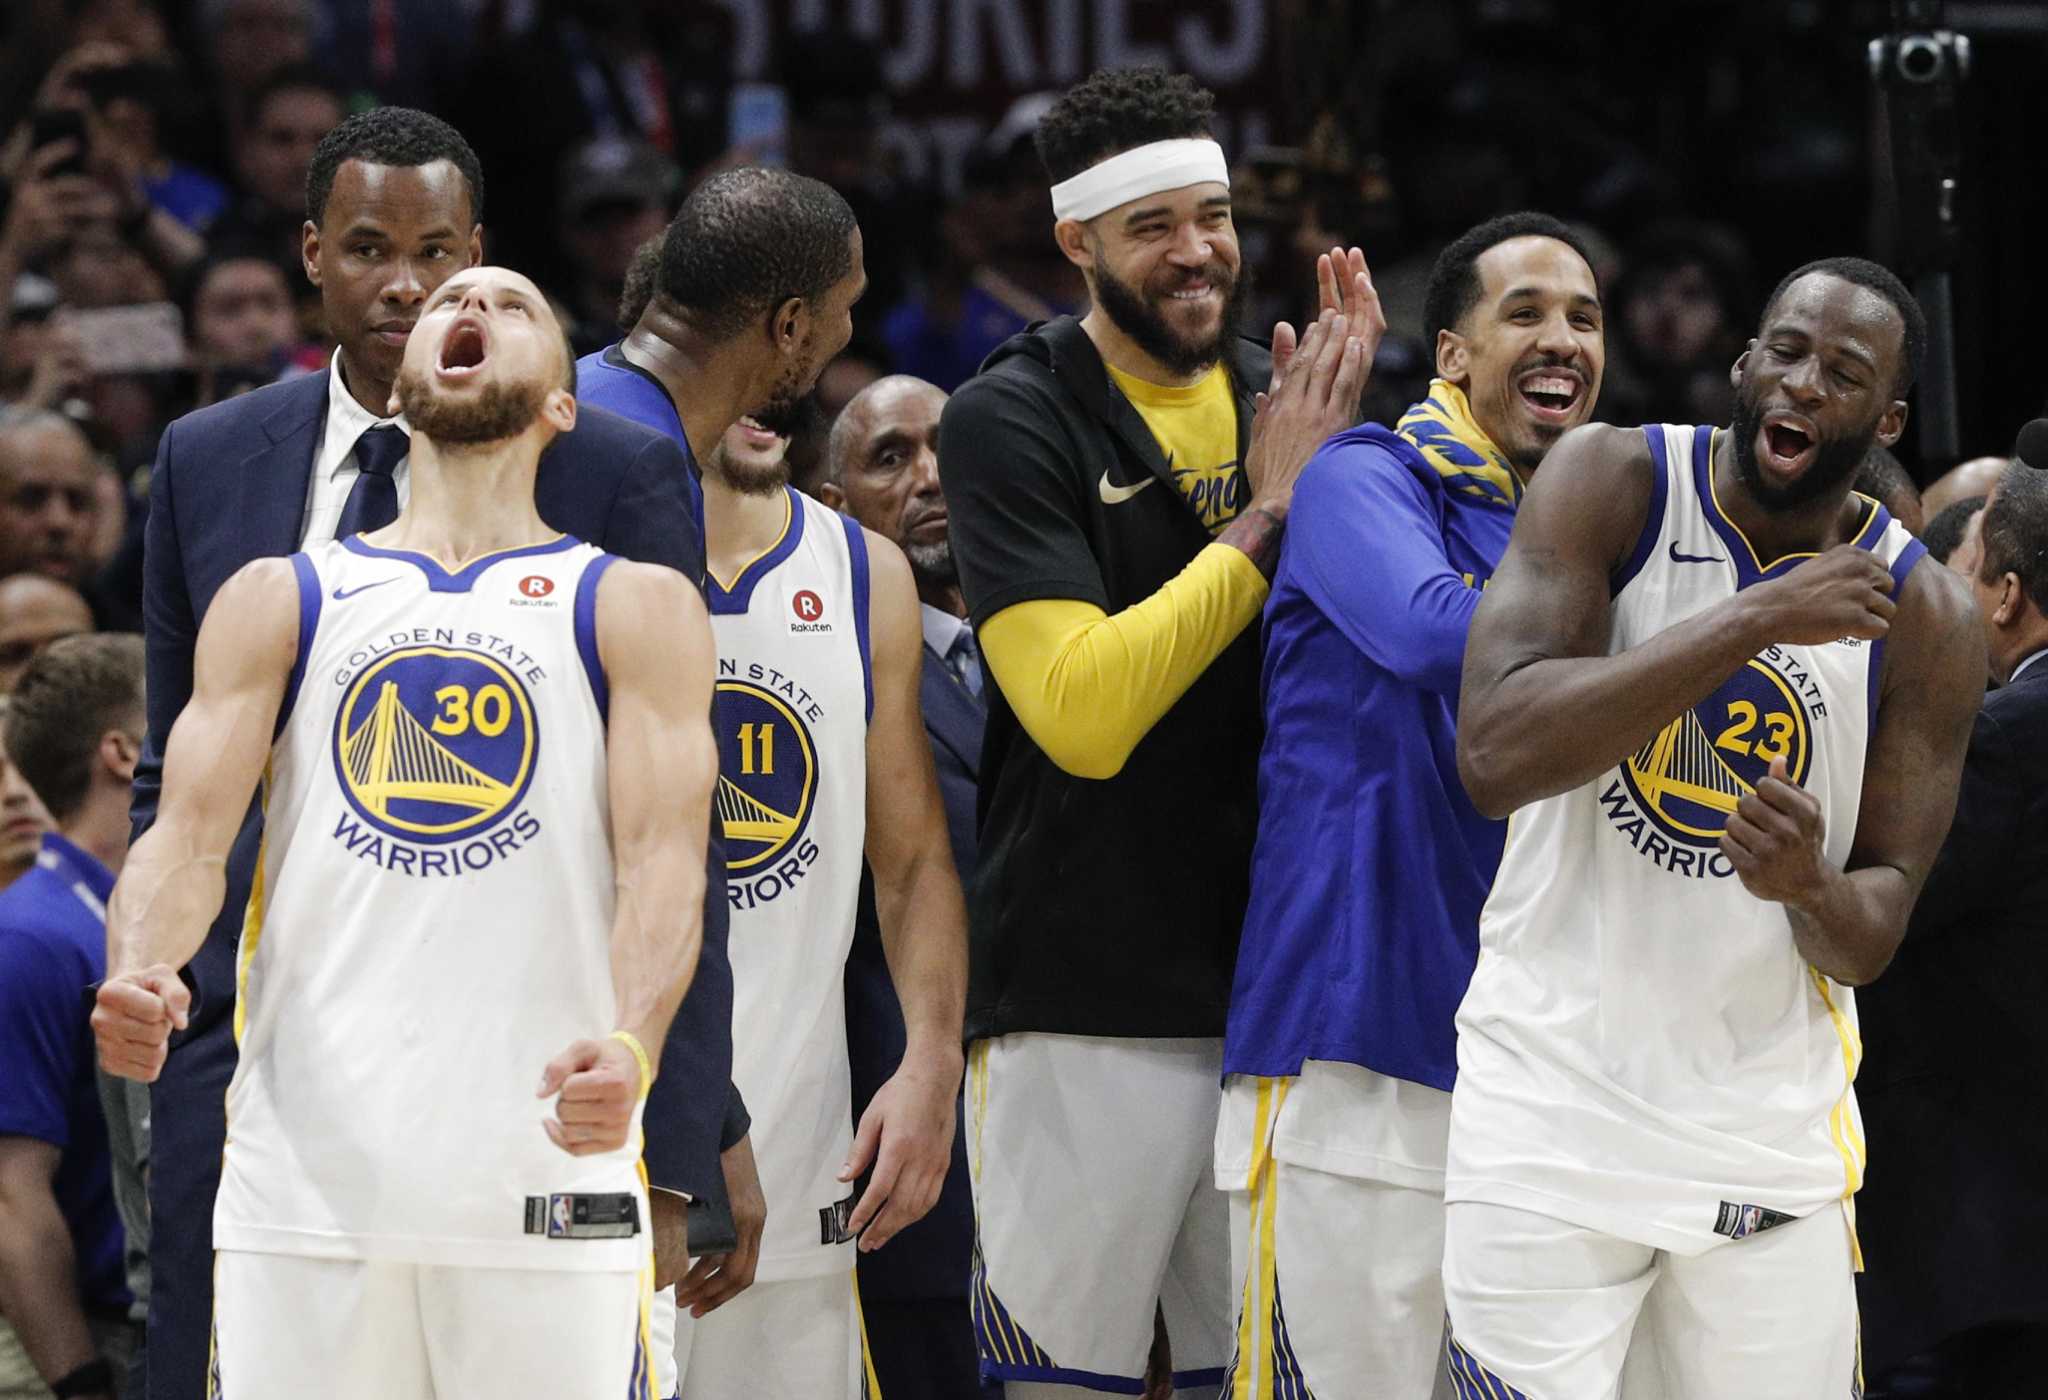 Golden State Warriors sweep Cleveland Cavaliers to cement dynasty